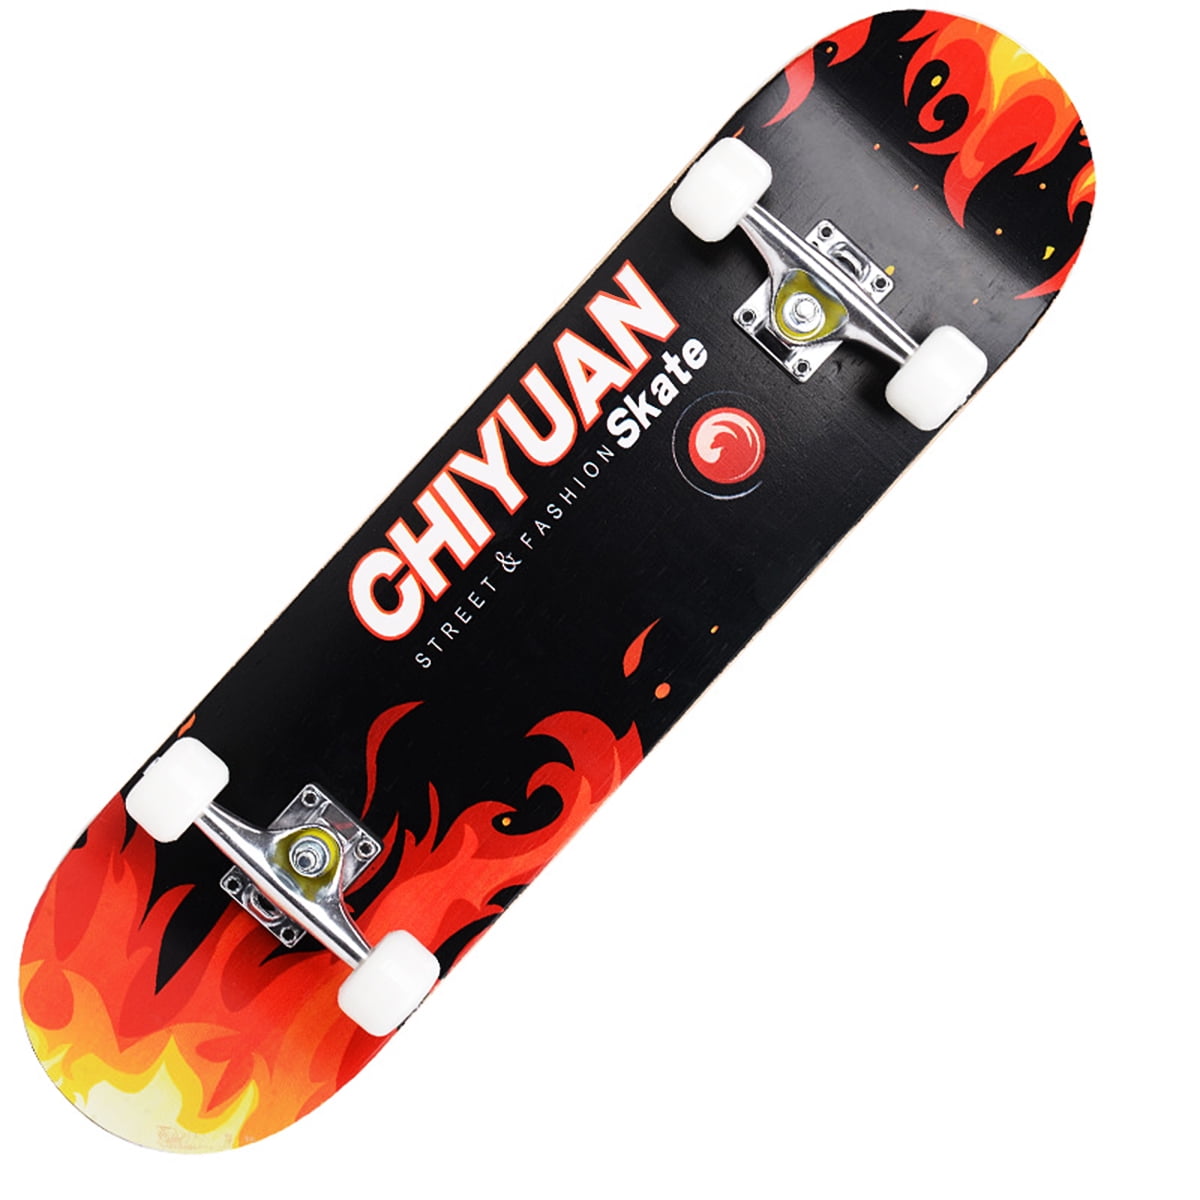 Details about  / Complete Skate Boards; Adult Teens Girls Boys Maple Skateboard for Beginners